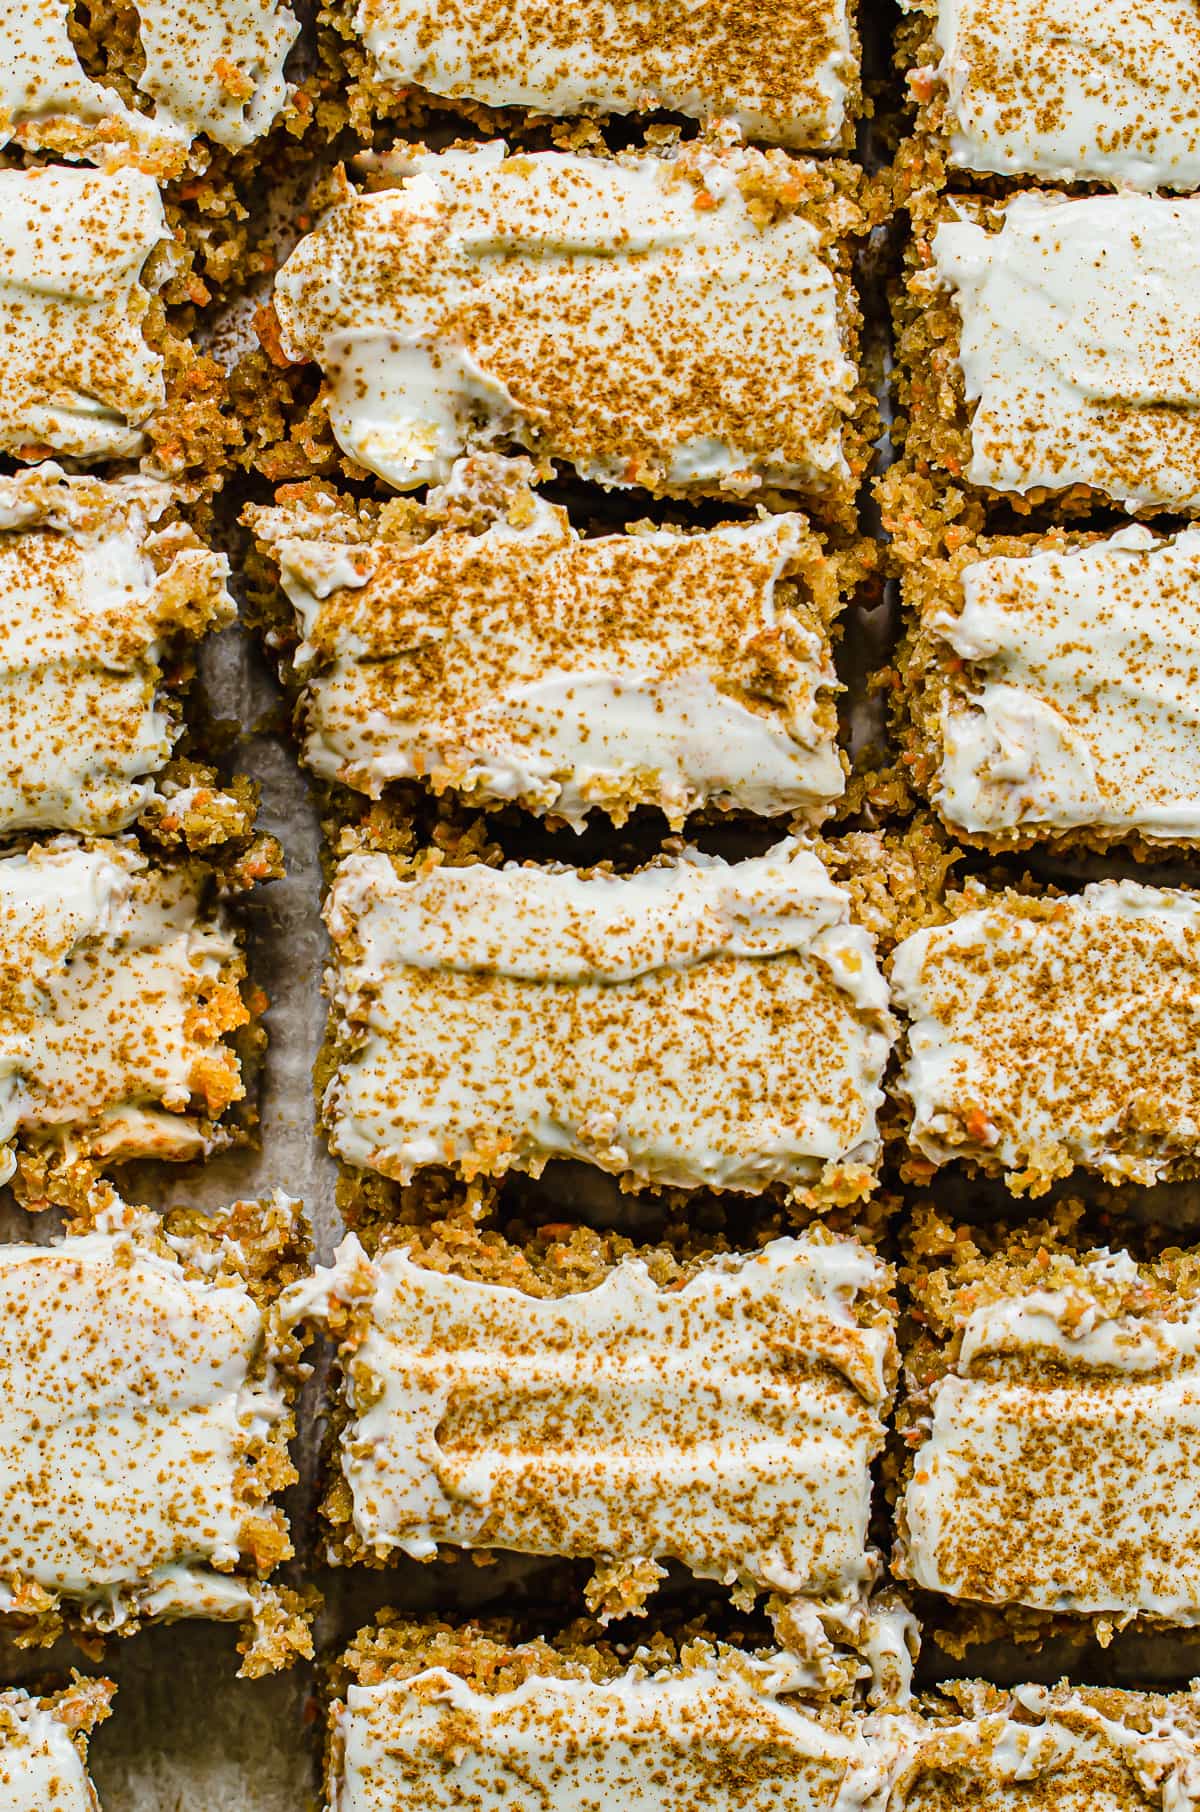 A close up shot of cake bar slices sprinkled with cinnamon.